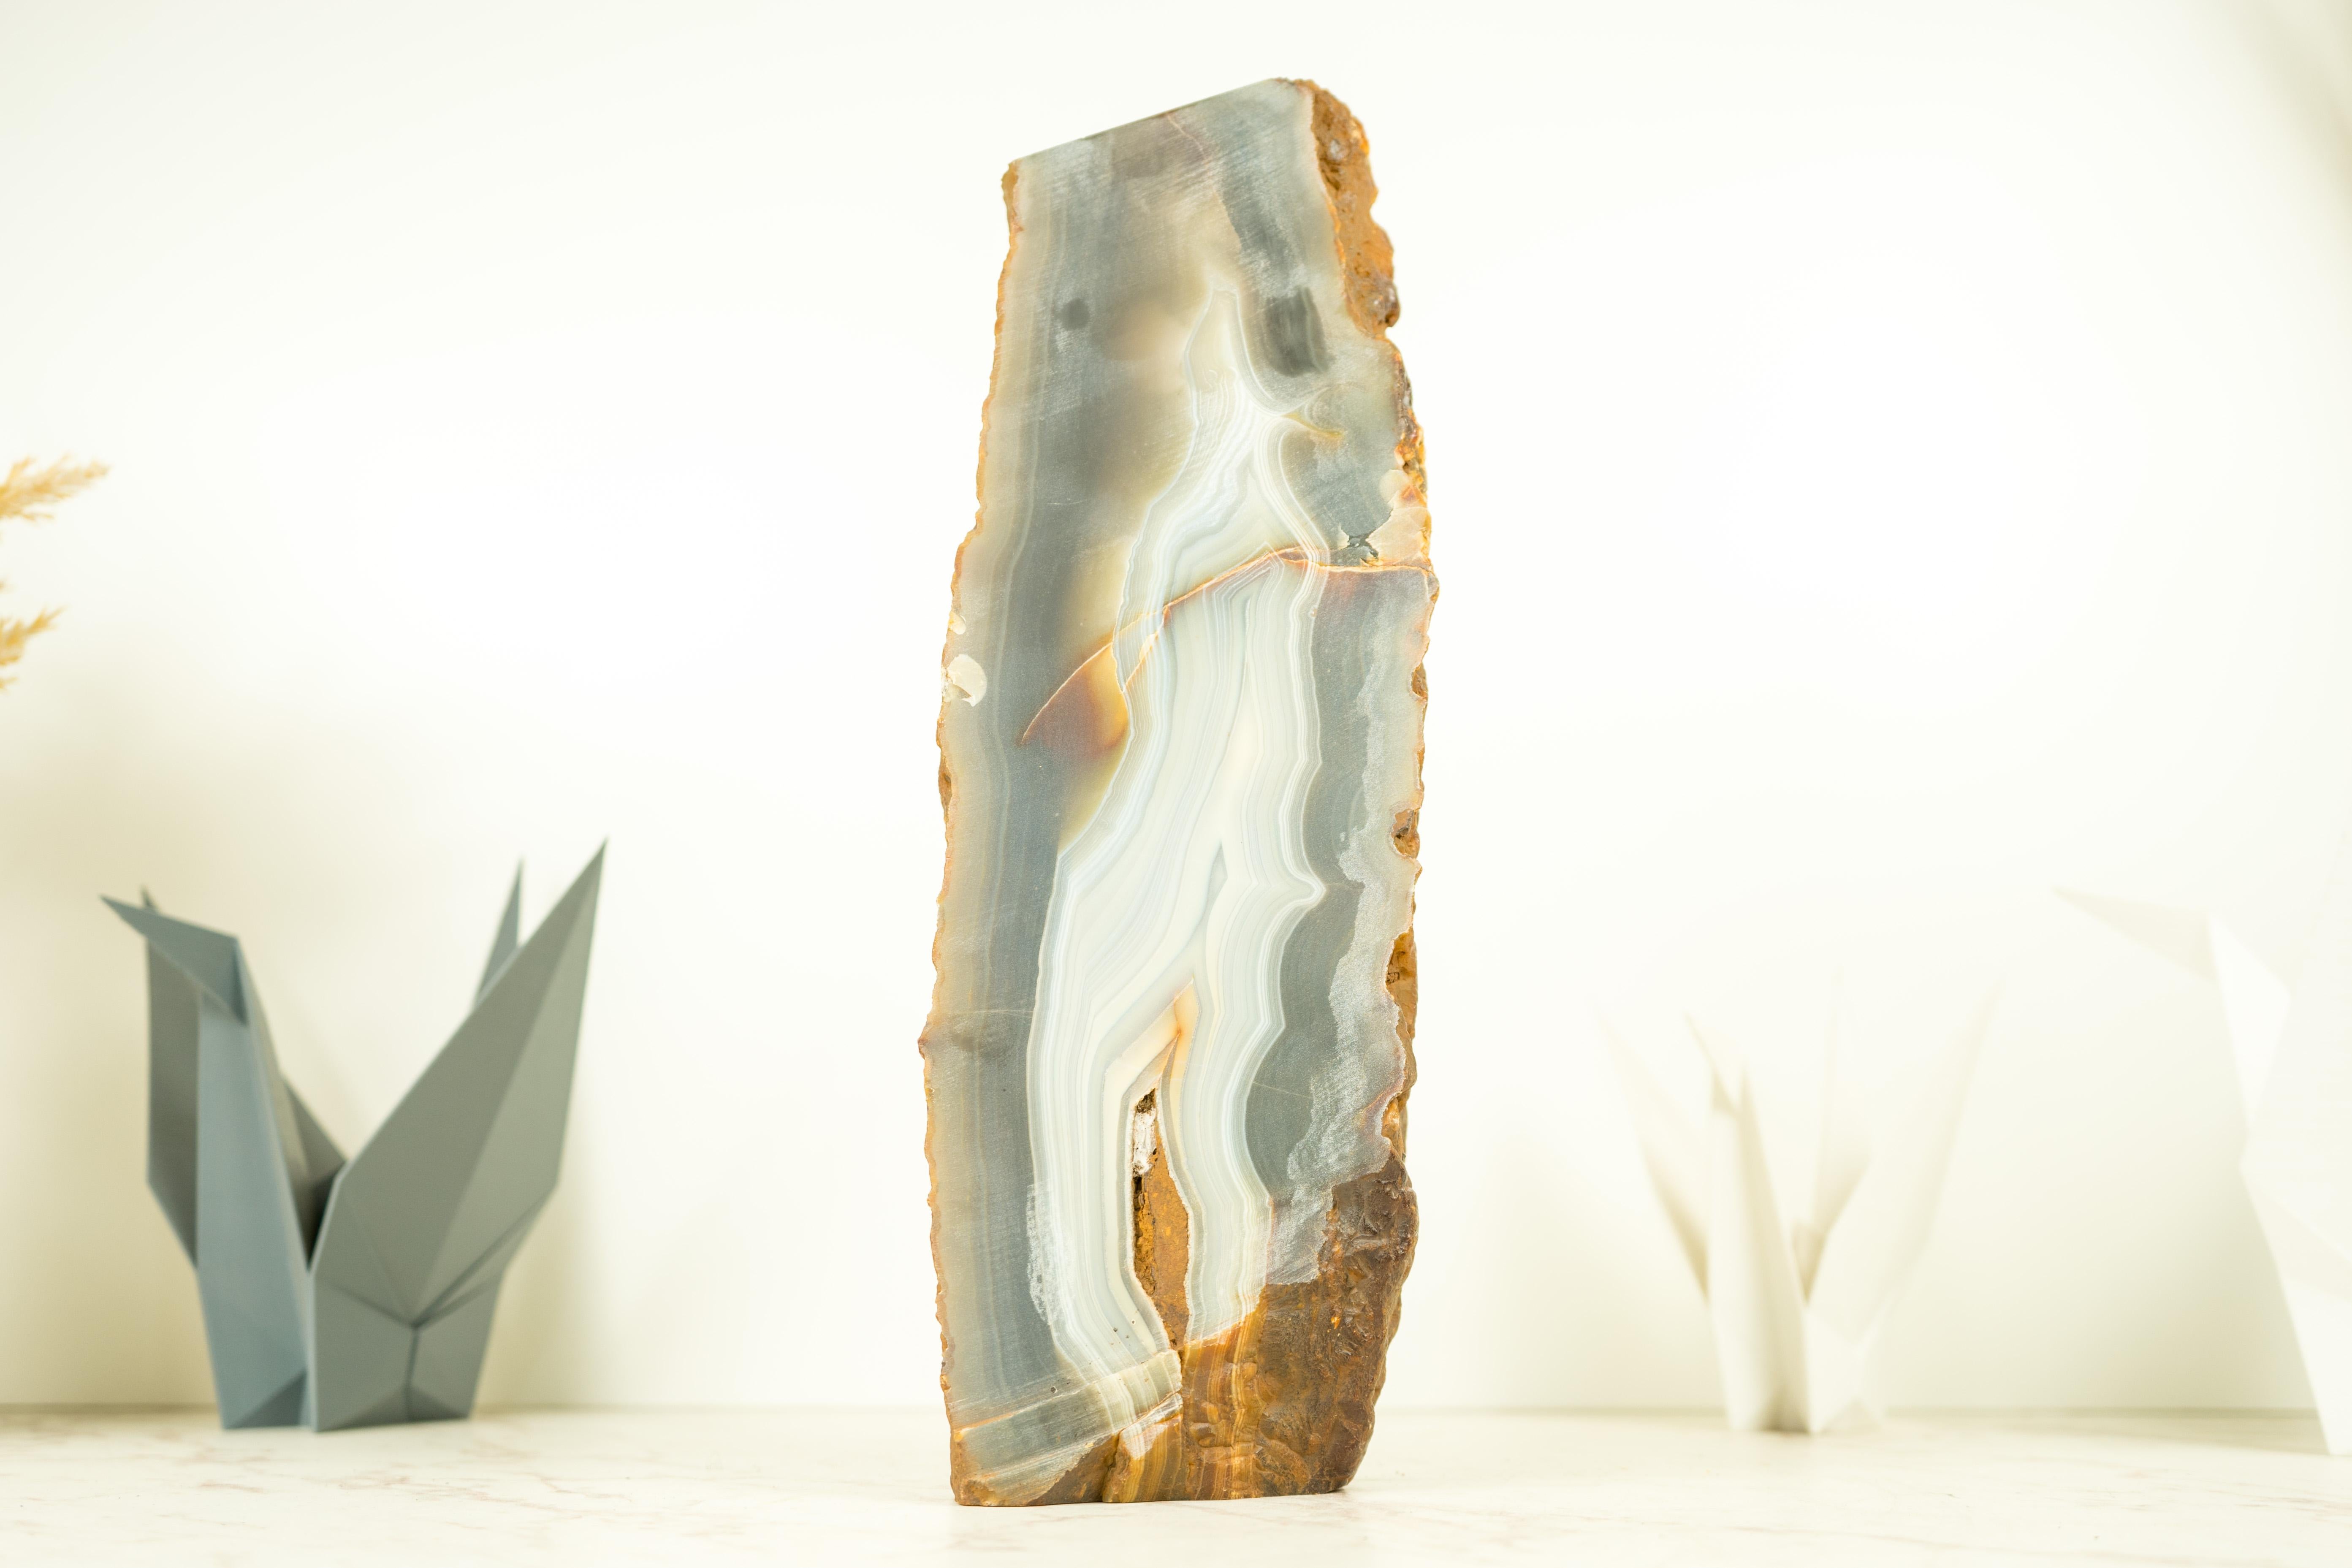 Brazilian Lace Agate Geode with Natural Fluid Laces as if it was Sculpted by Nature For Sale